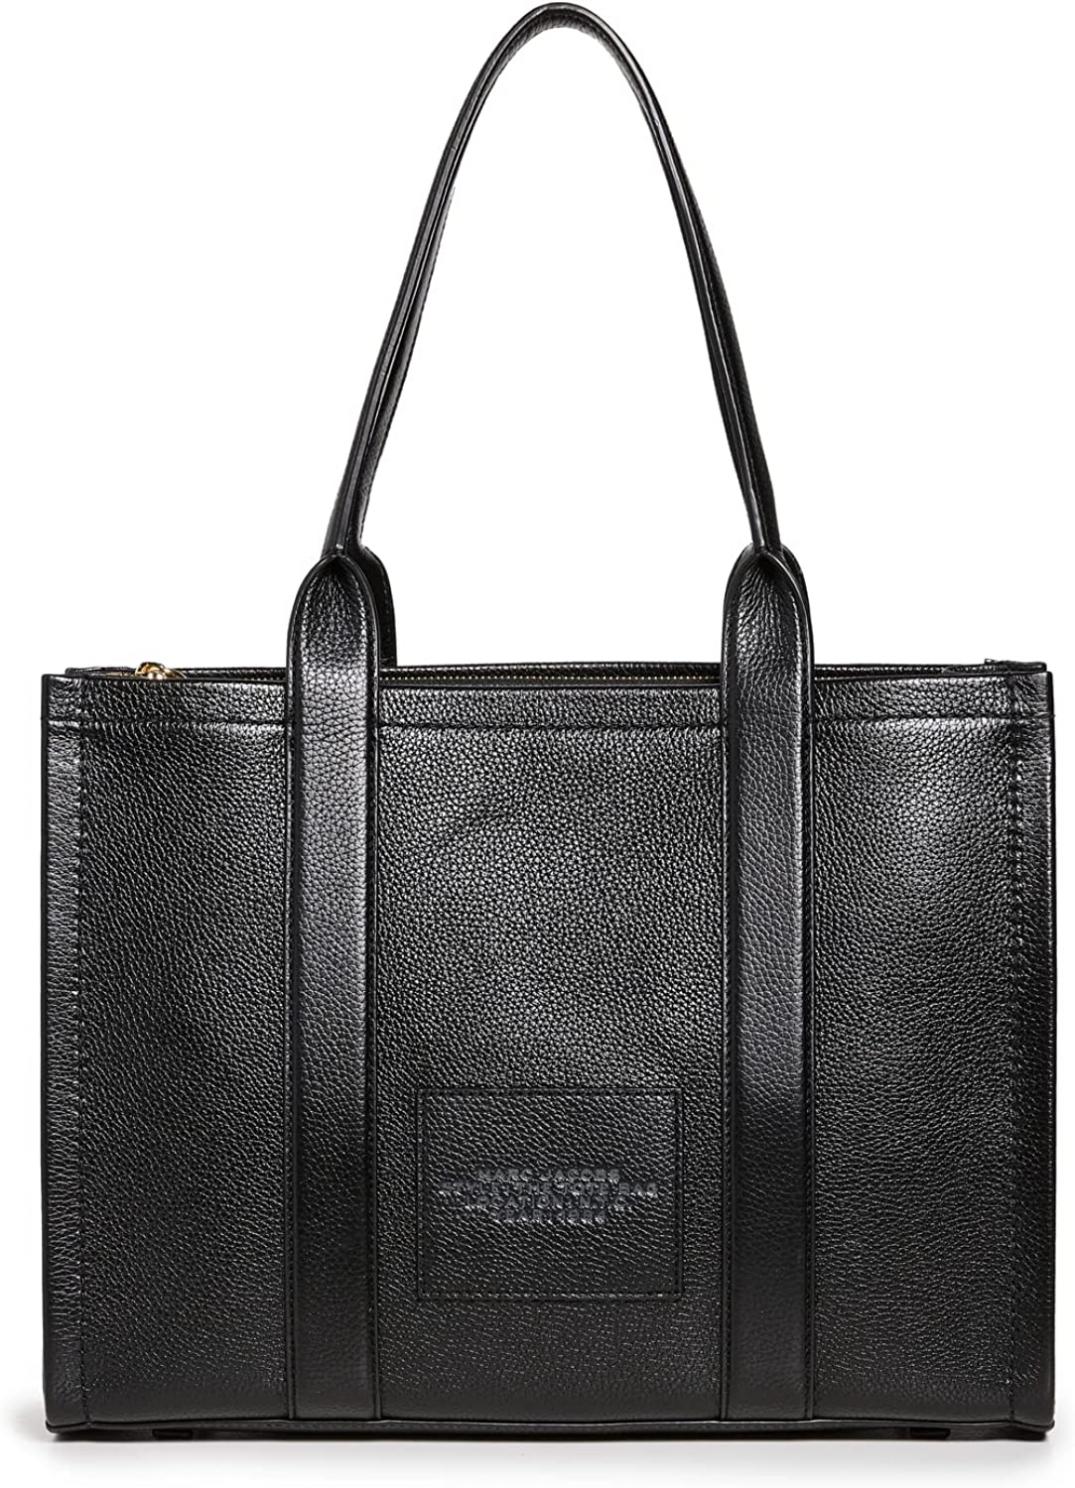 Marc Jacobs Women's The Work Tote